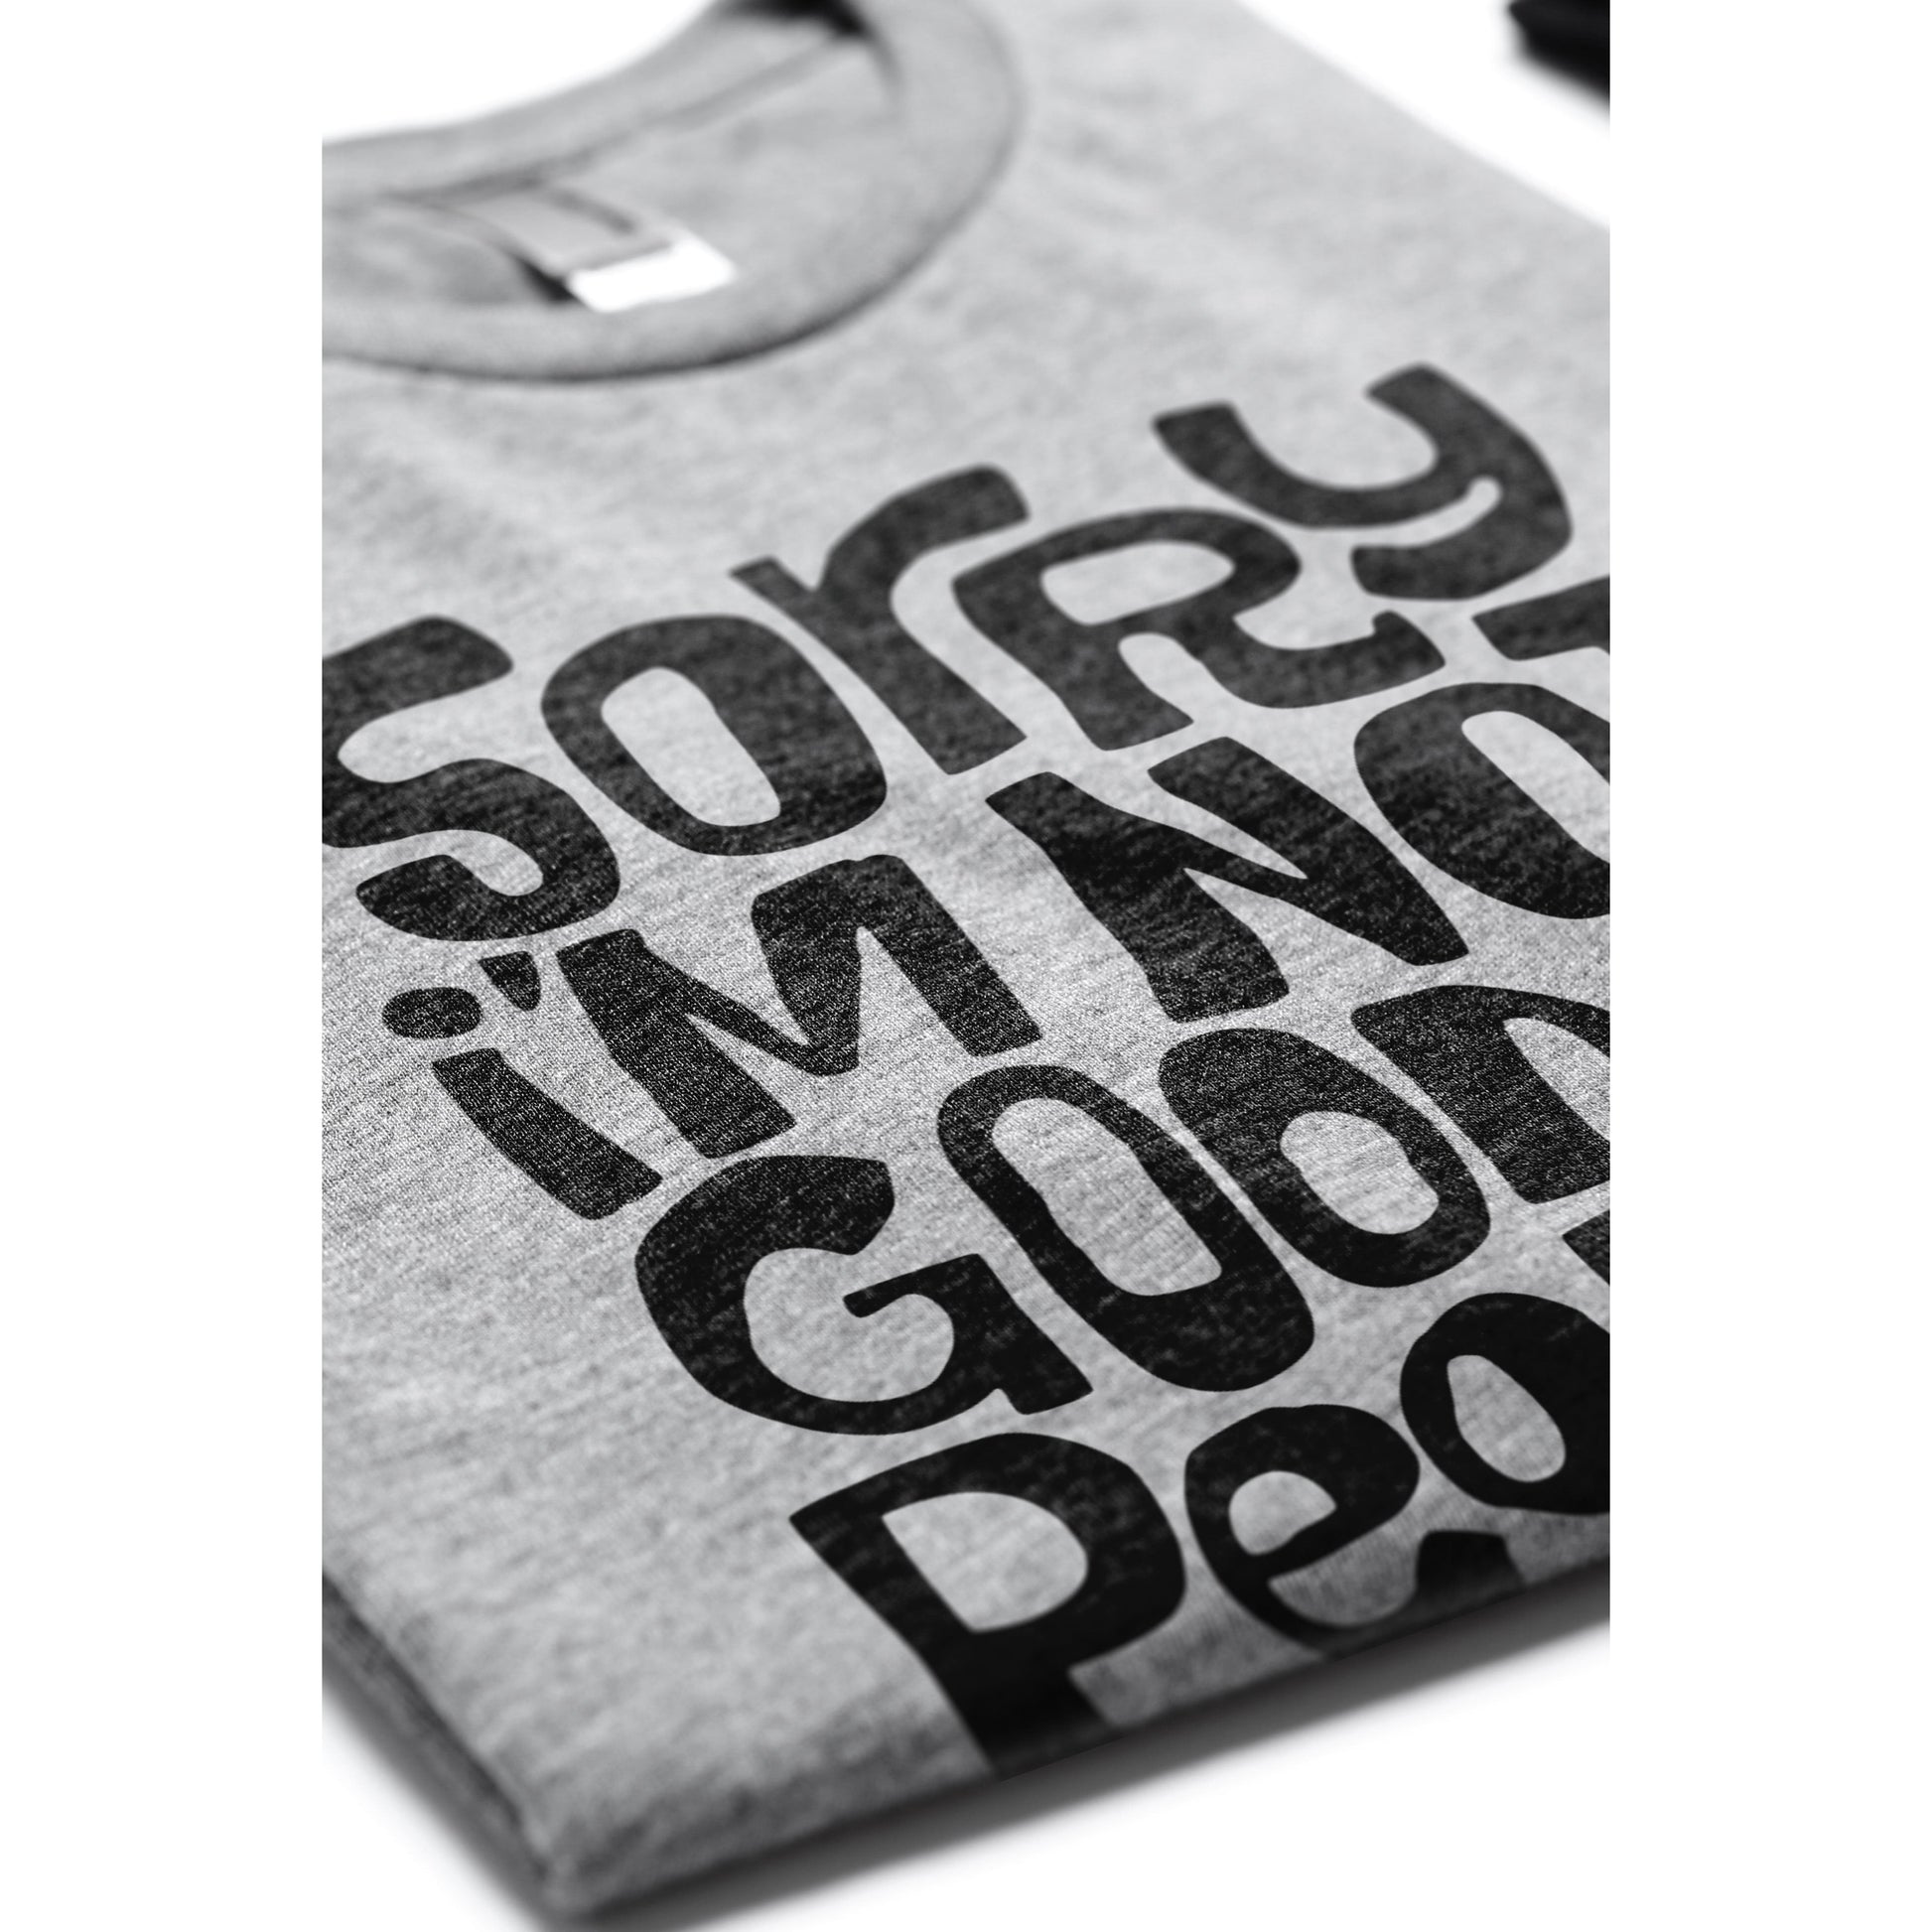 Sorry I'm Not Good at People-ing - threadtank | stories you can wear